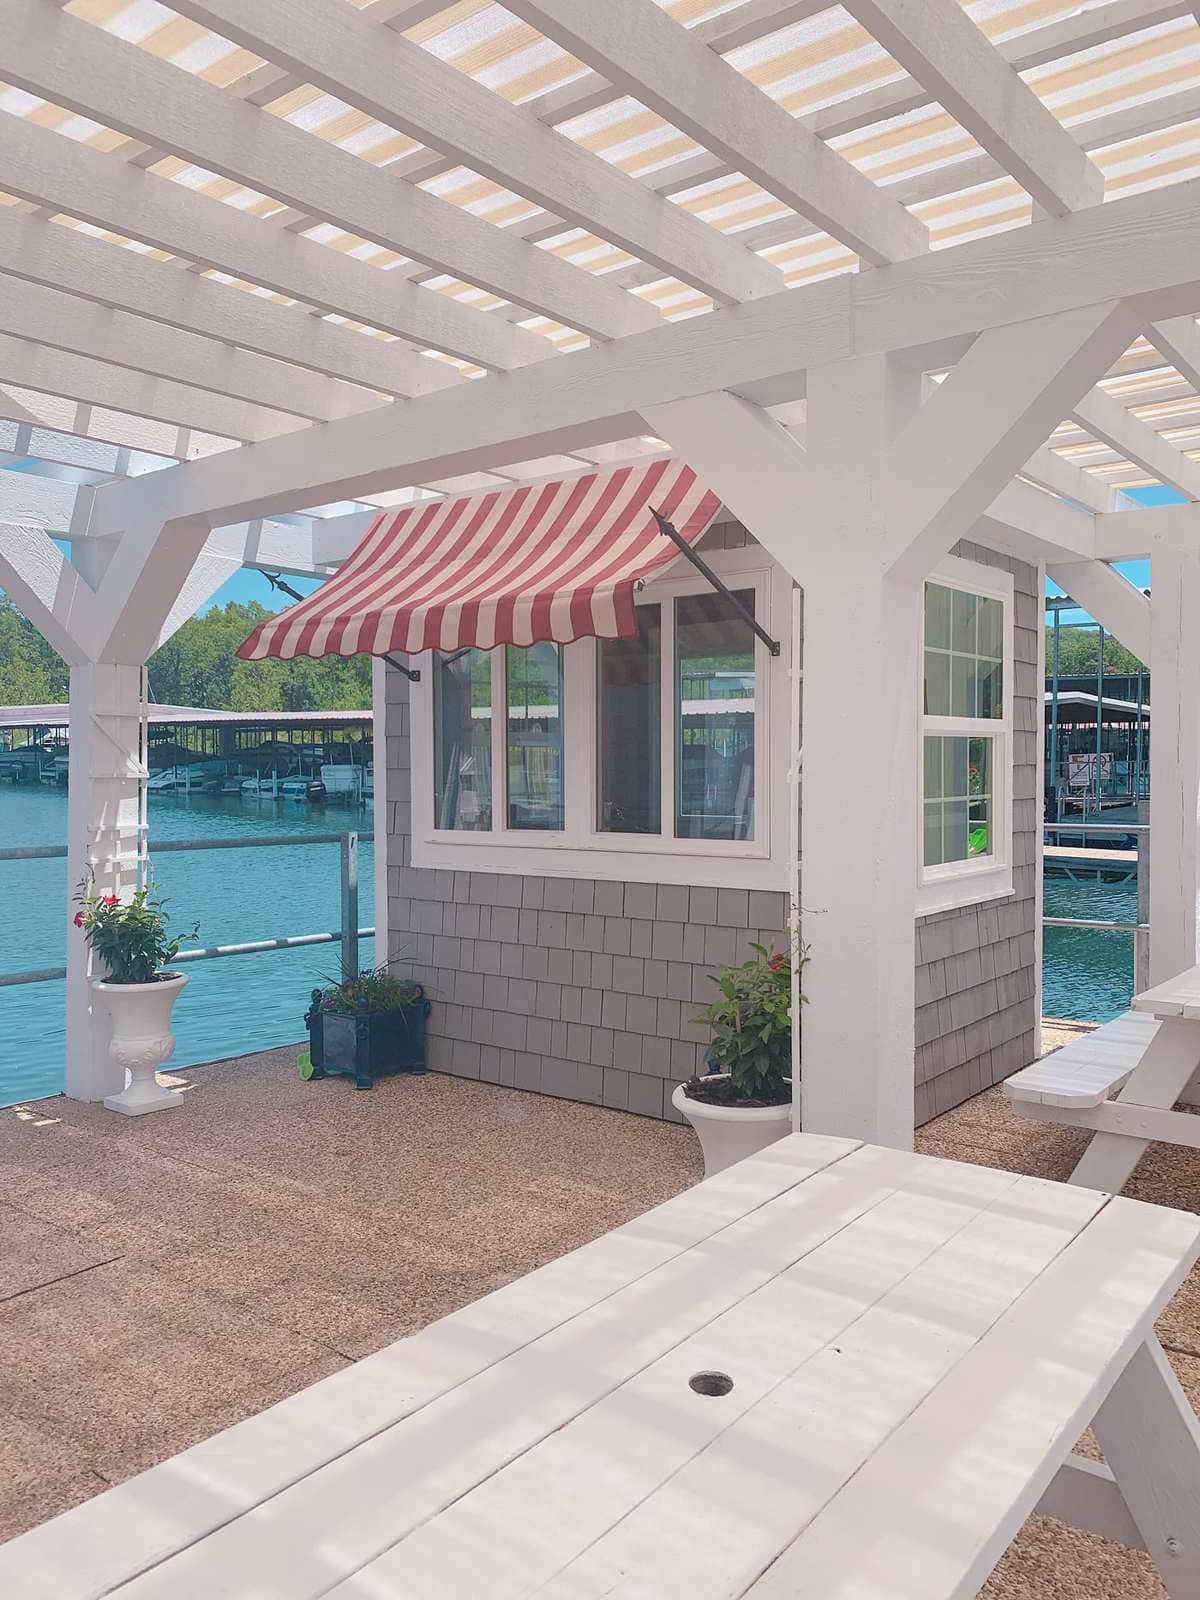 state park marina snow cone shop with stripe awning and pergola